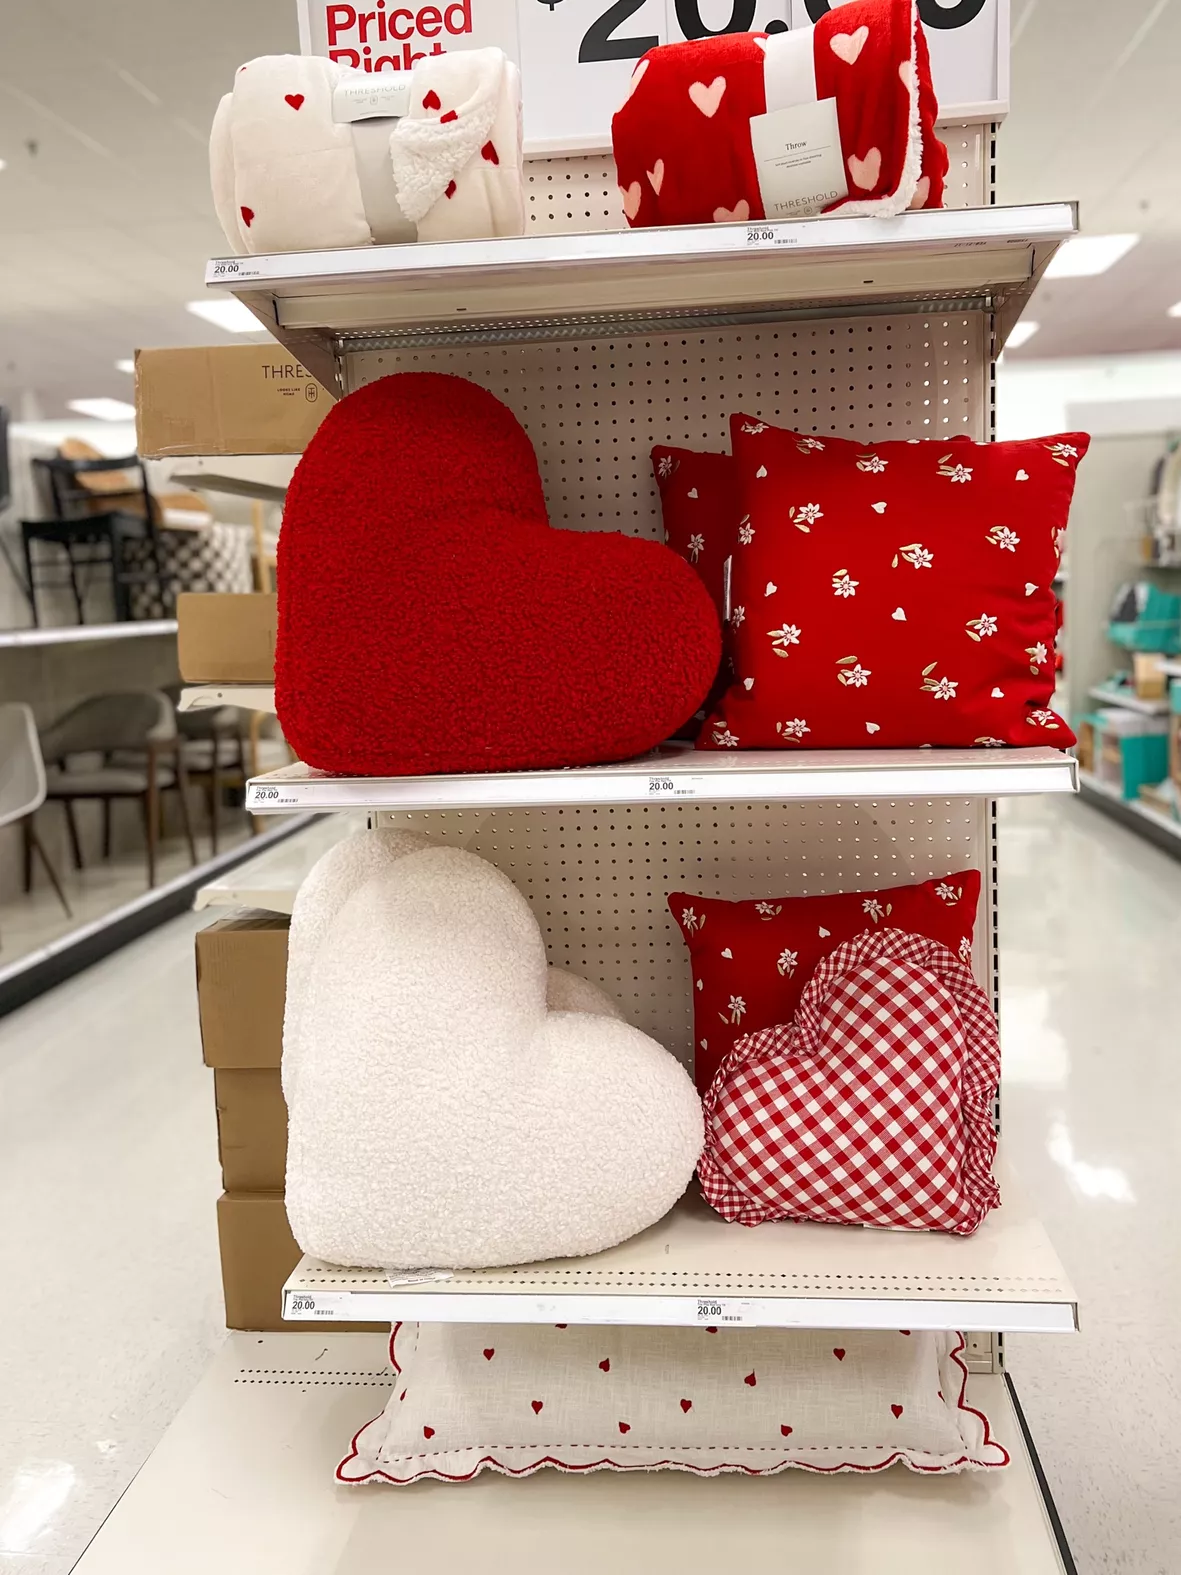 Why People Are Camping Out at Target for the Valentine's Stanley